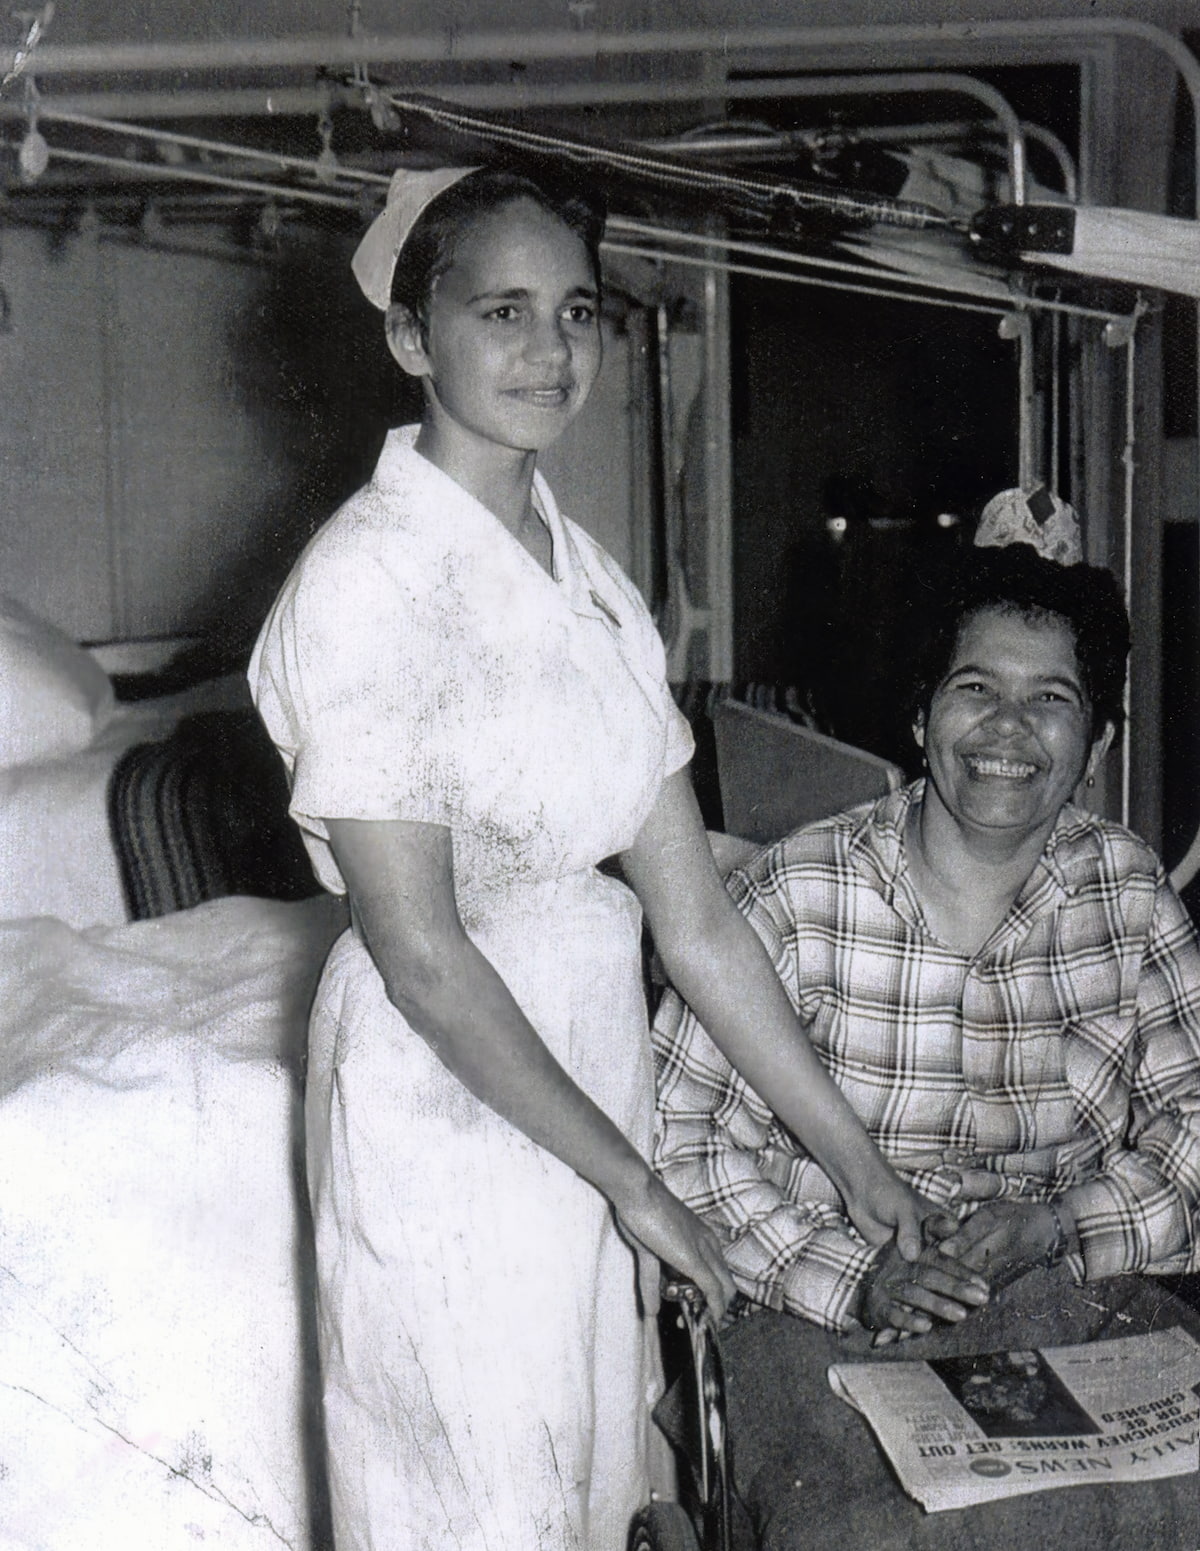 Averil nursing at Royal Perth hospital with Curly Gillespie in about 1958